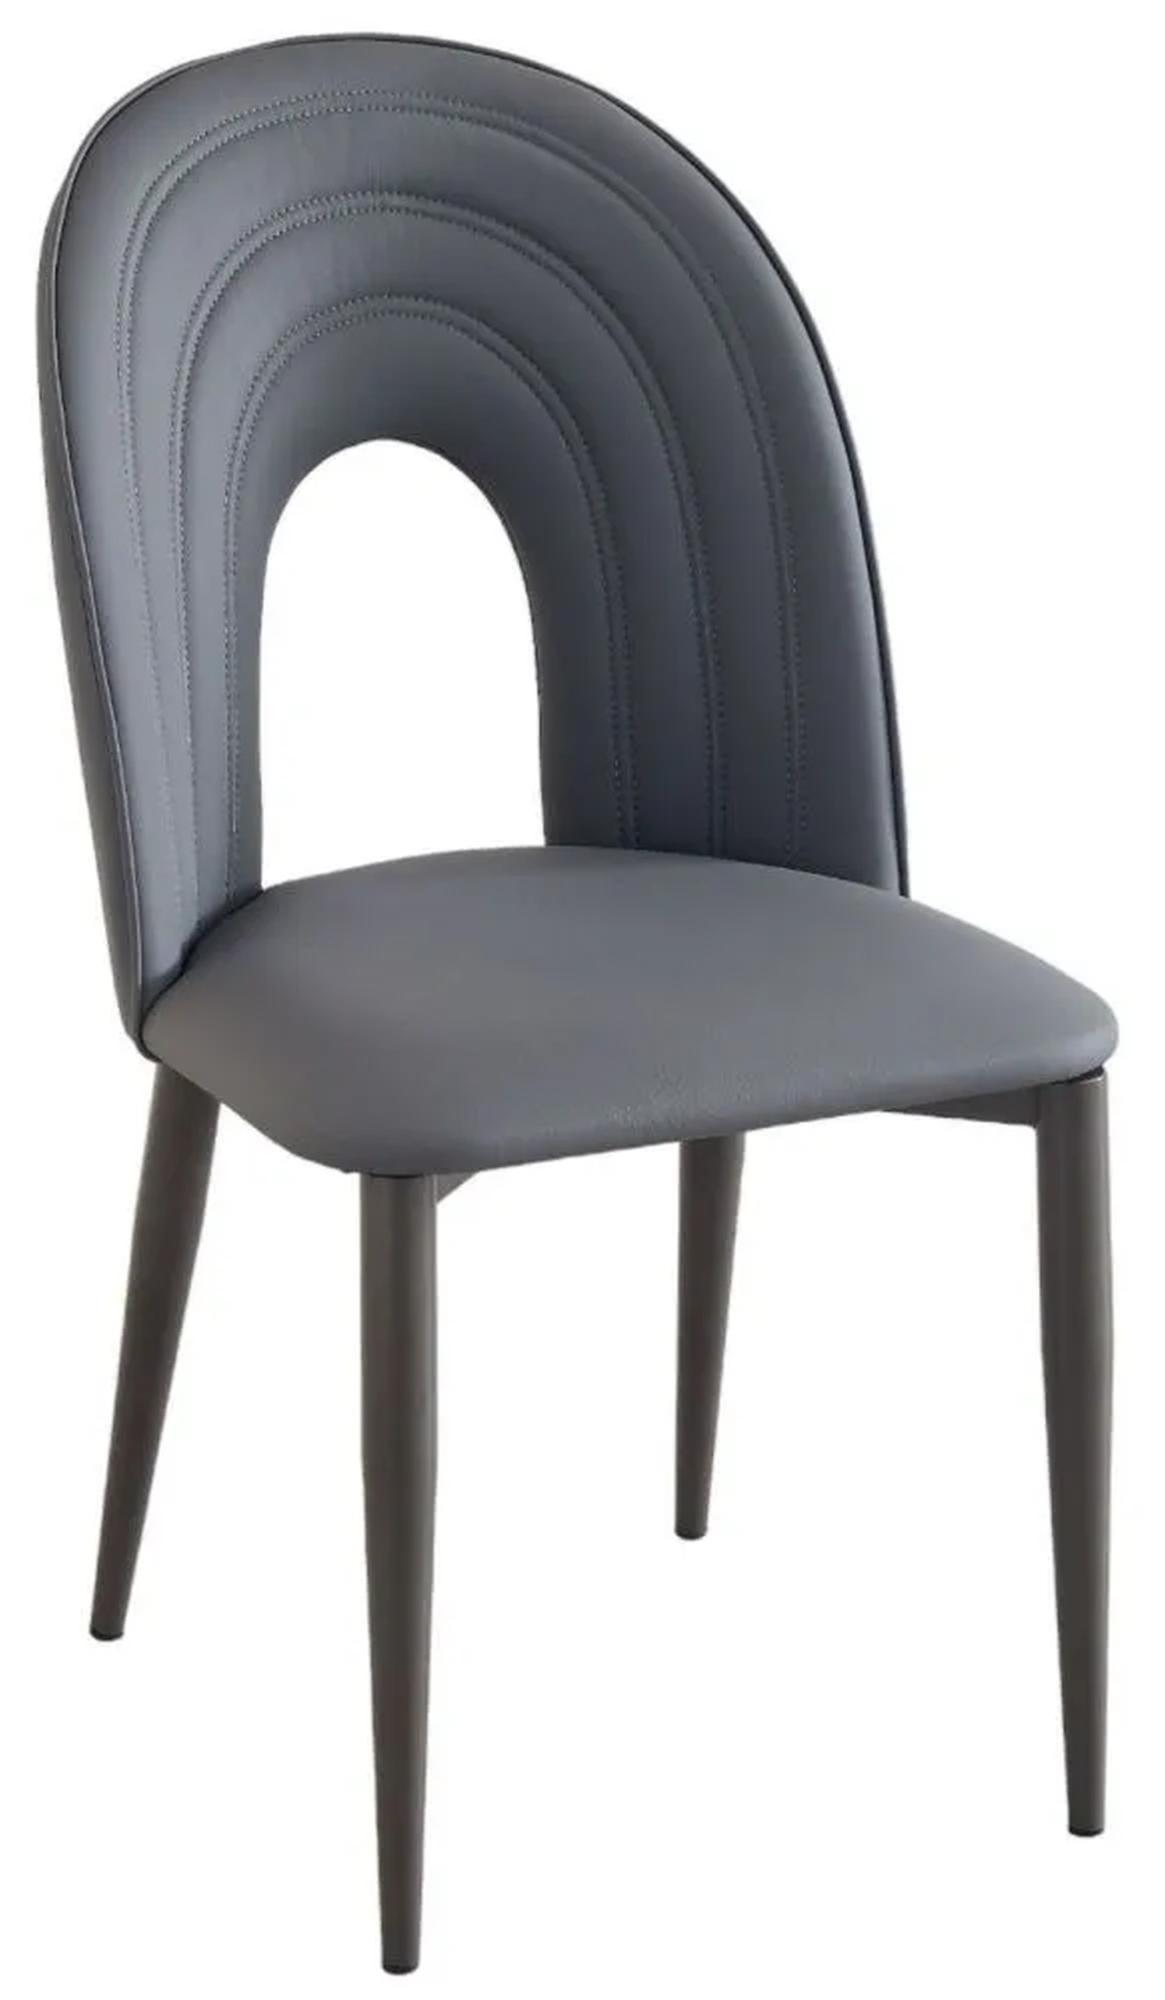 Echo Dark Grey Faux Leather High Back Dining Chair with Black Legs